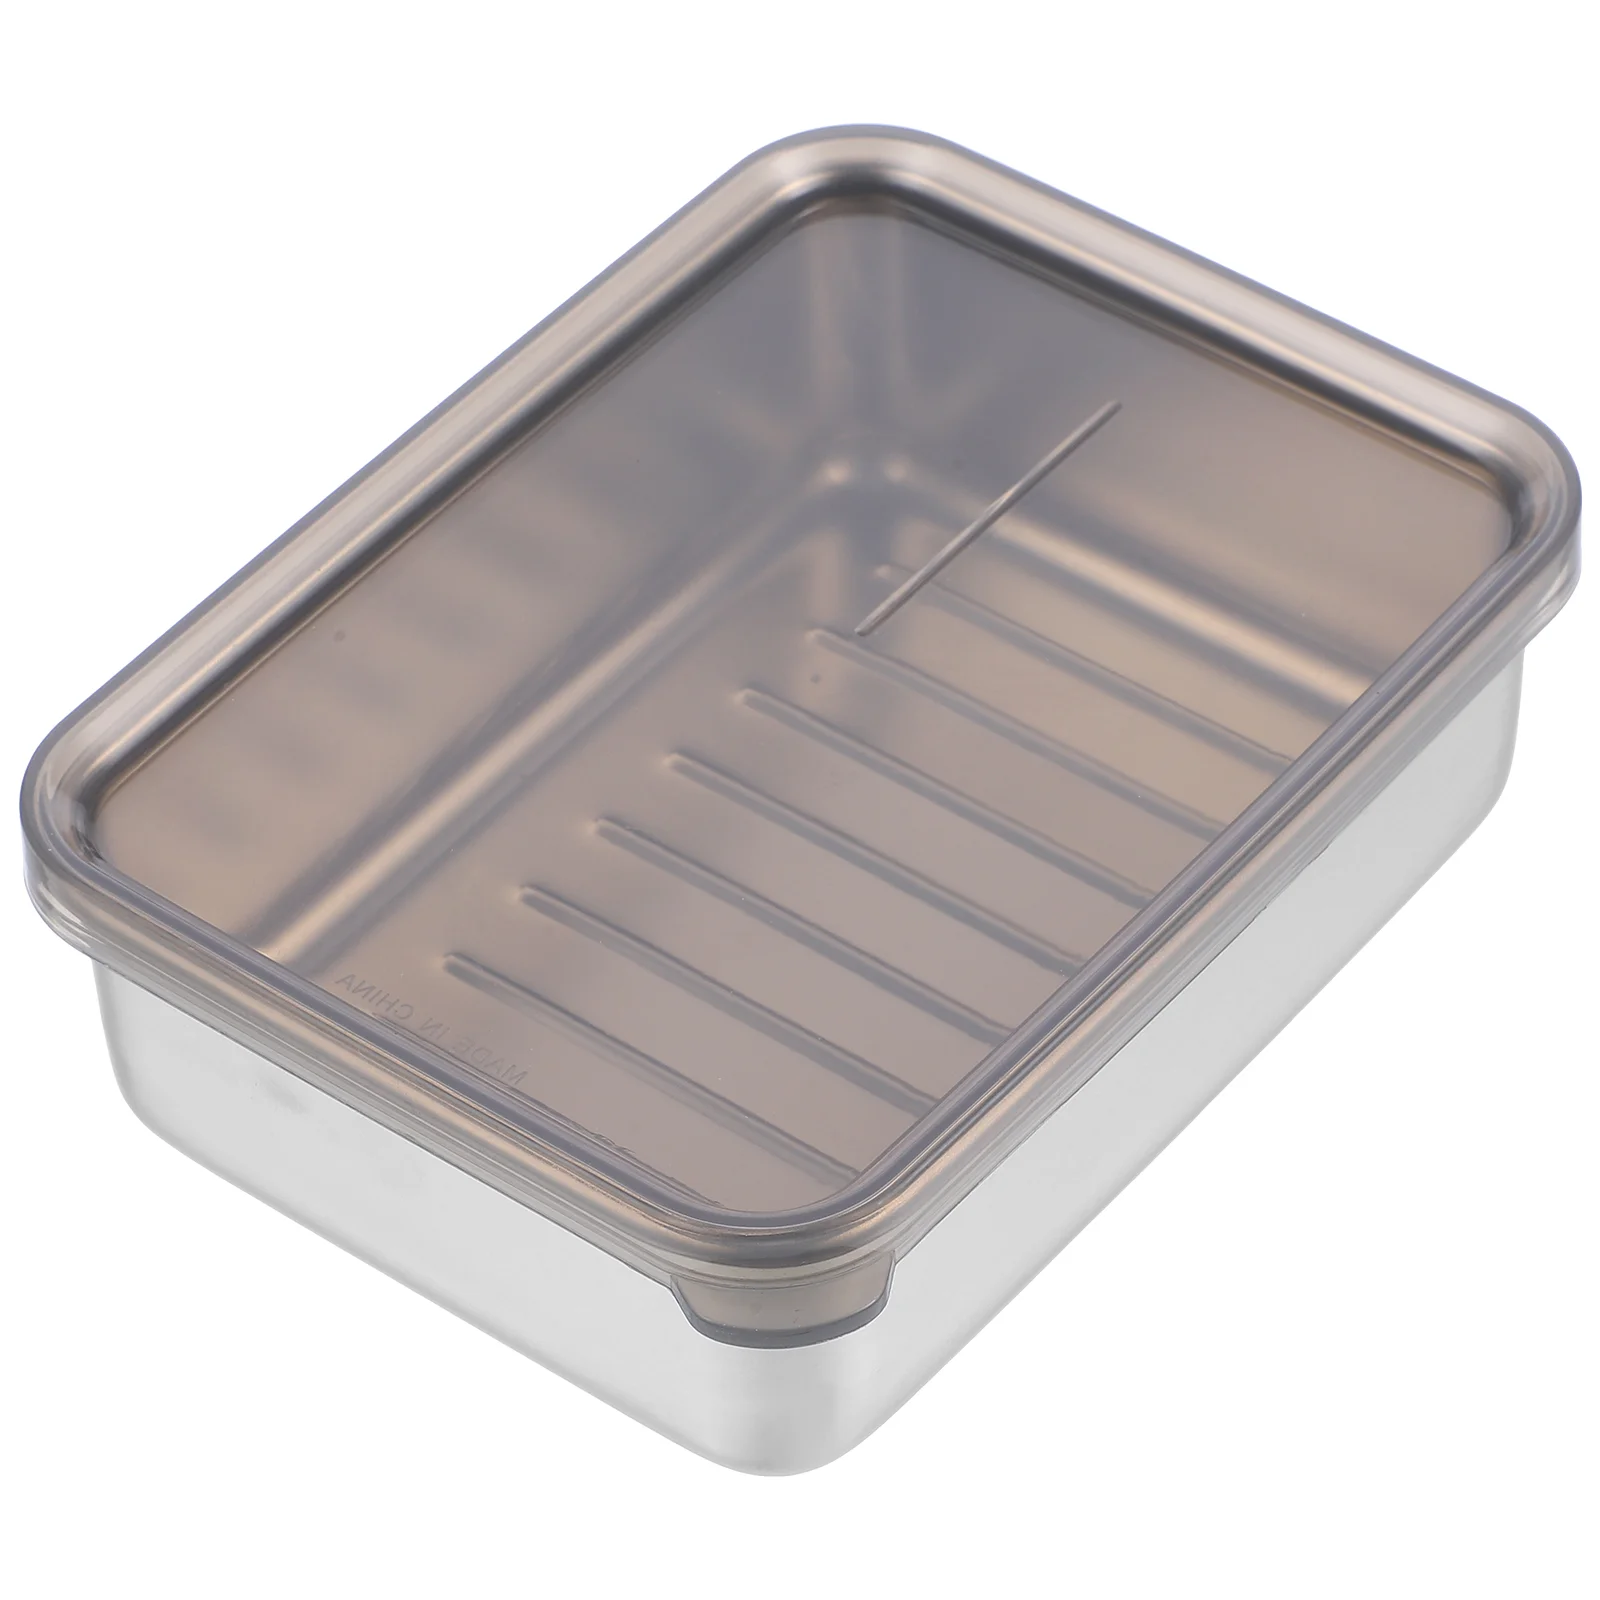 

Stainless Steel Crisper Containers For Fridge Bacon Cheese Pp Refrigerator Cases Butter Dishes Slice Holder Food